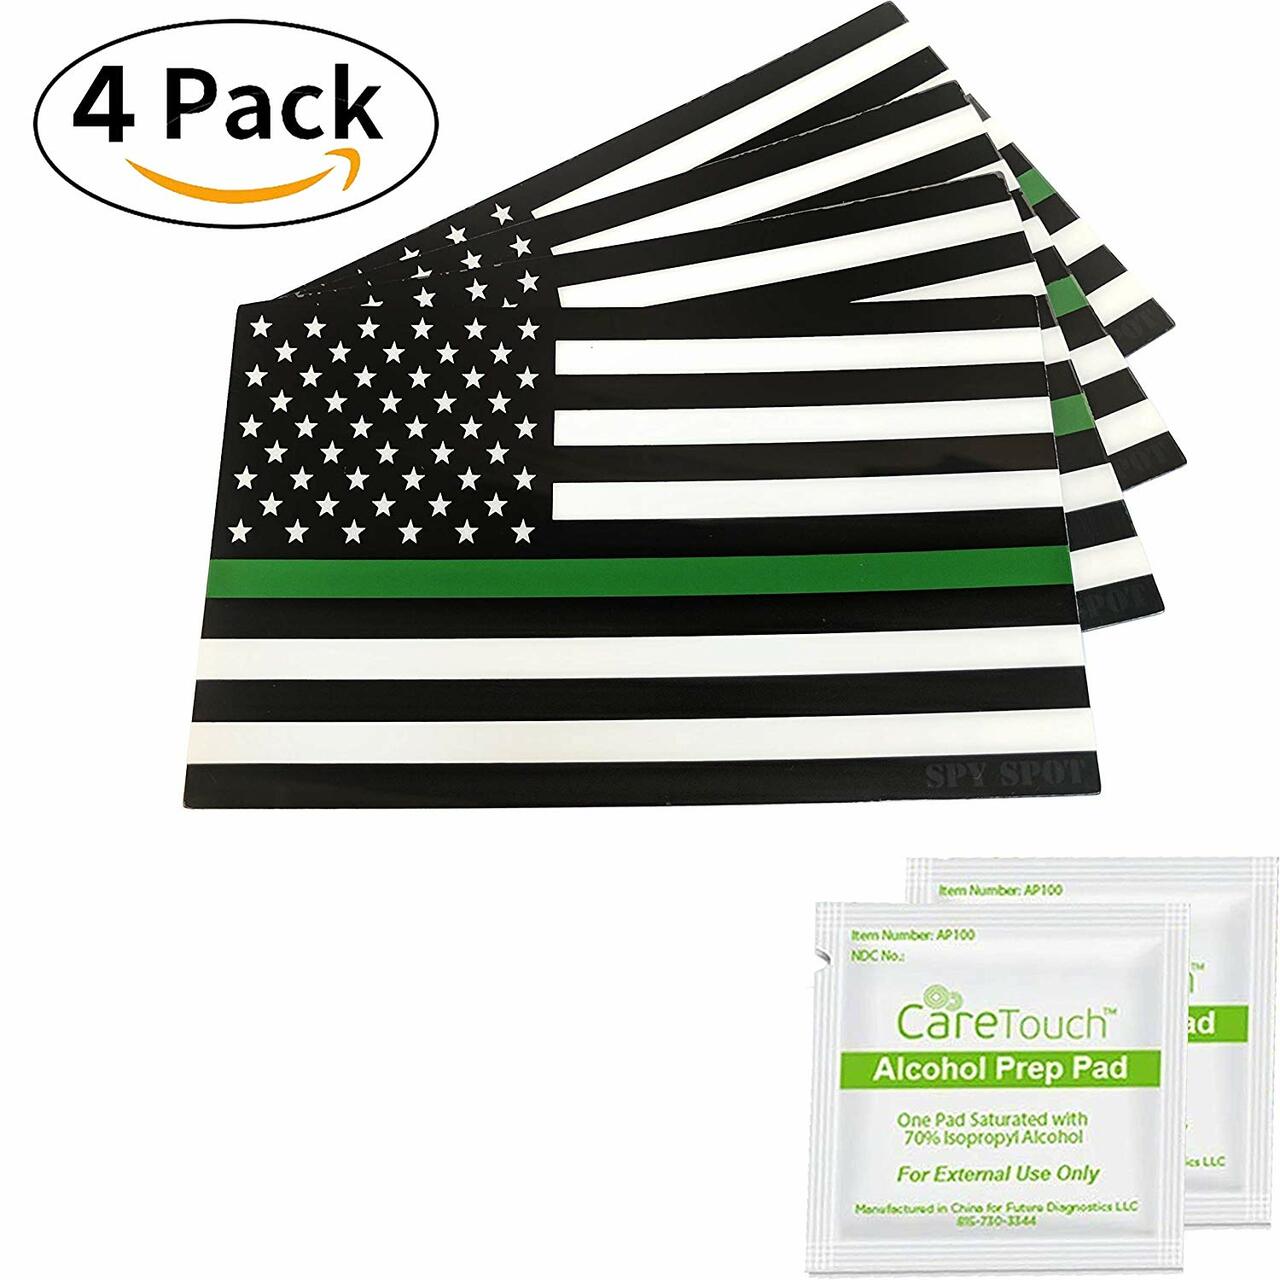 Thin Green Line Support US Flag Army Vinyl Heavy Duty Sticker Decal 4" x 2.5" Weatherproof UV Resistant Set of 4